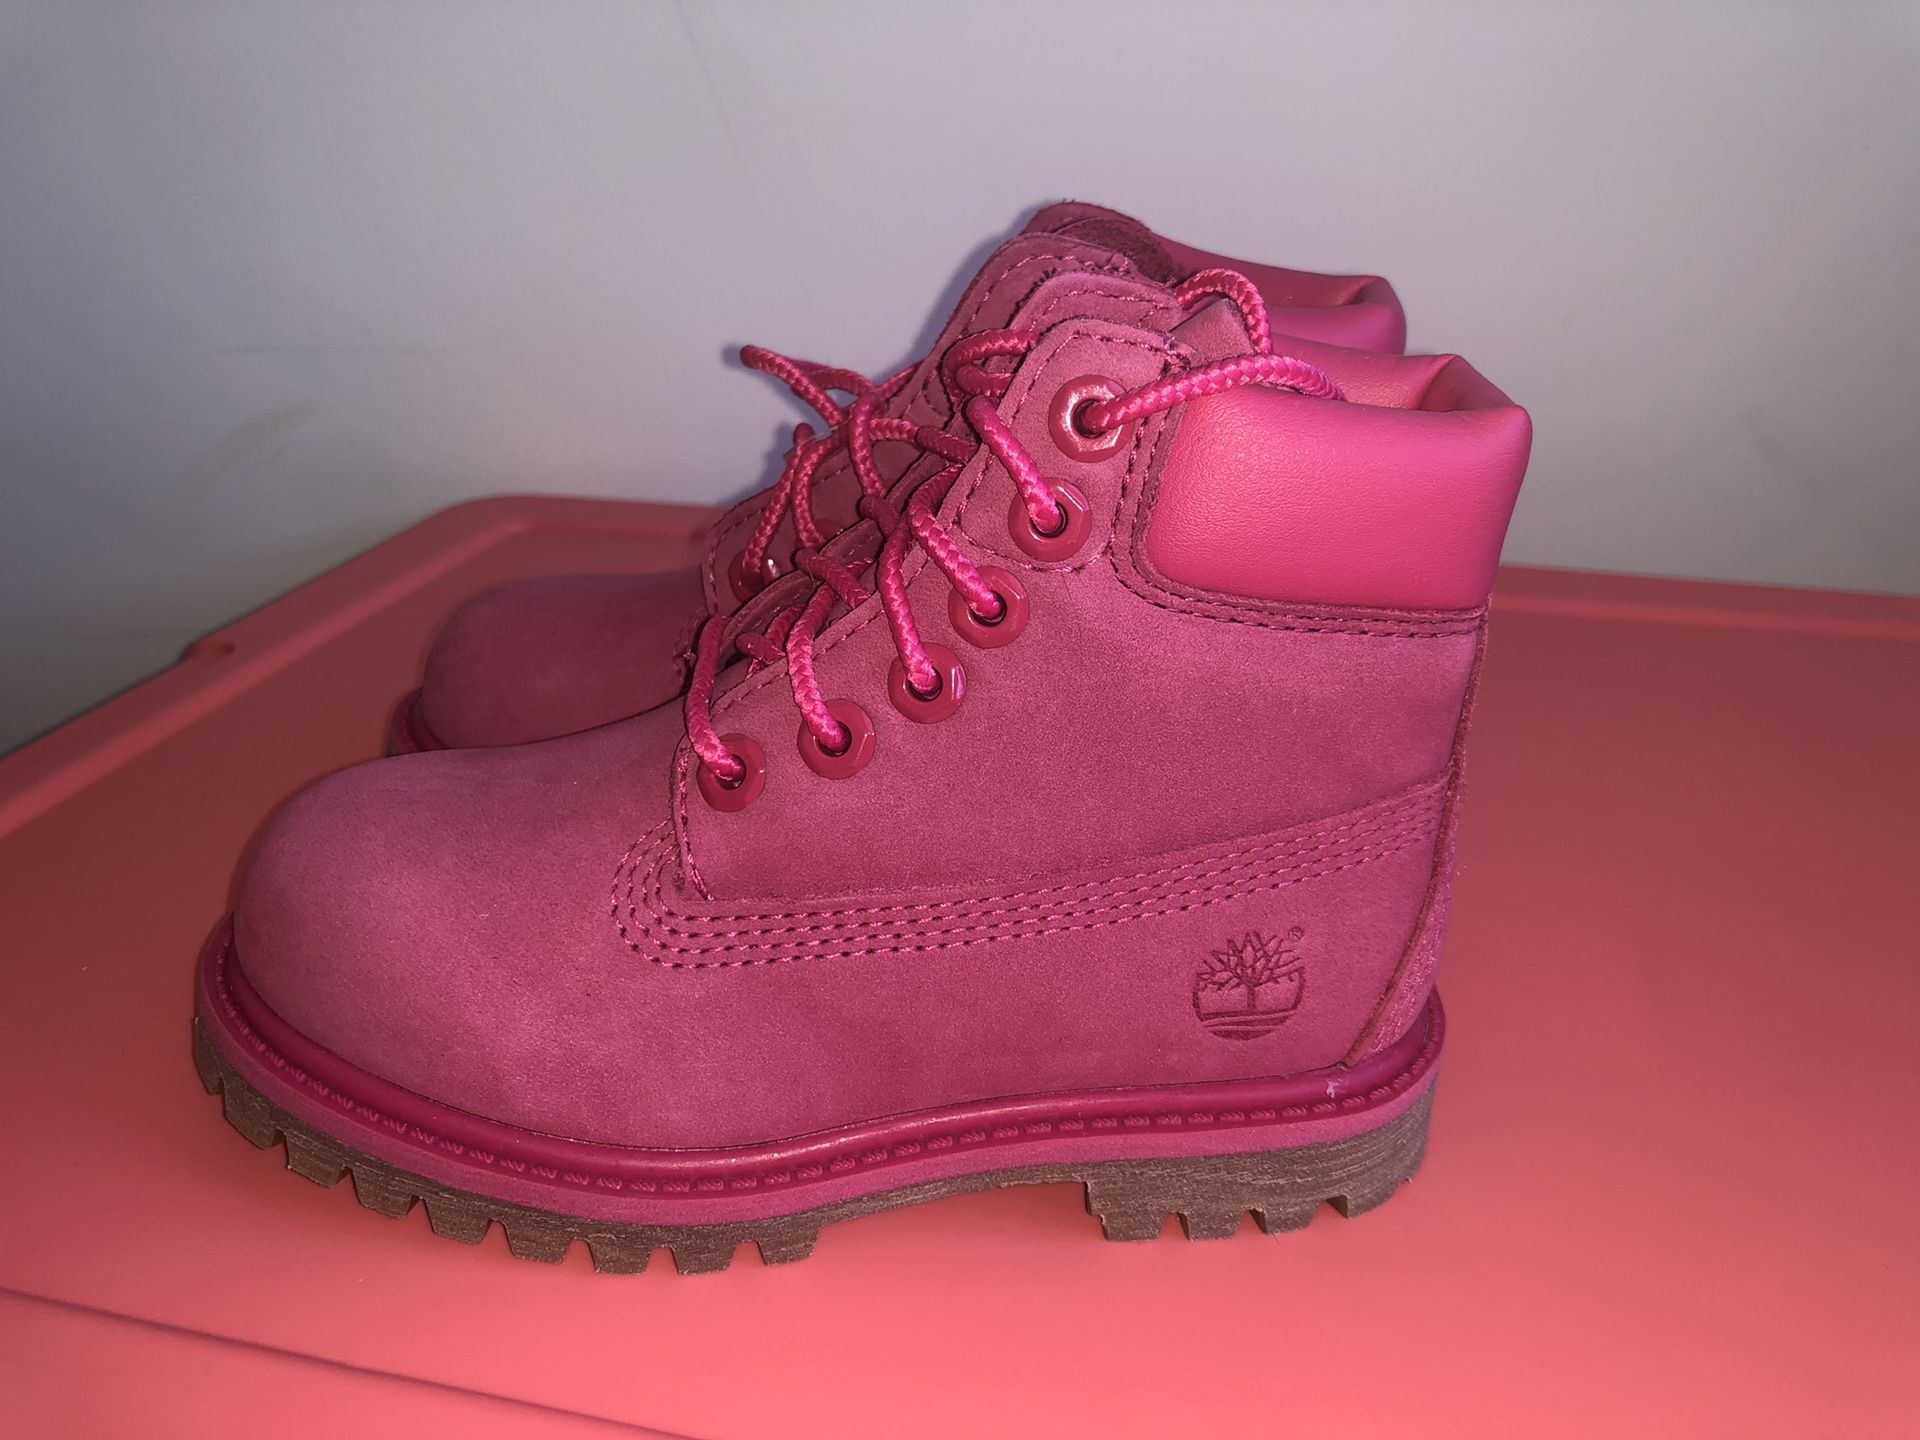 Timberland Toddler Boots Size 9 NEW